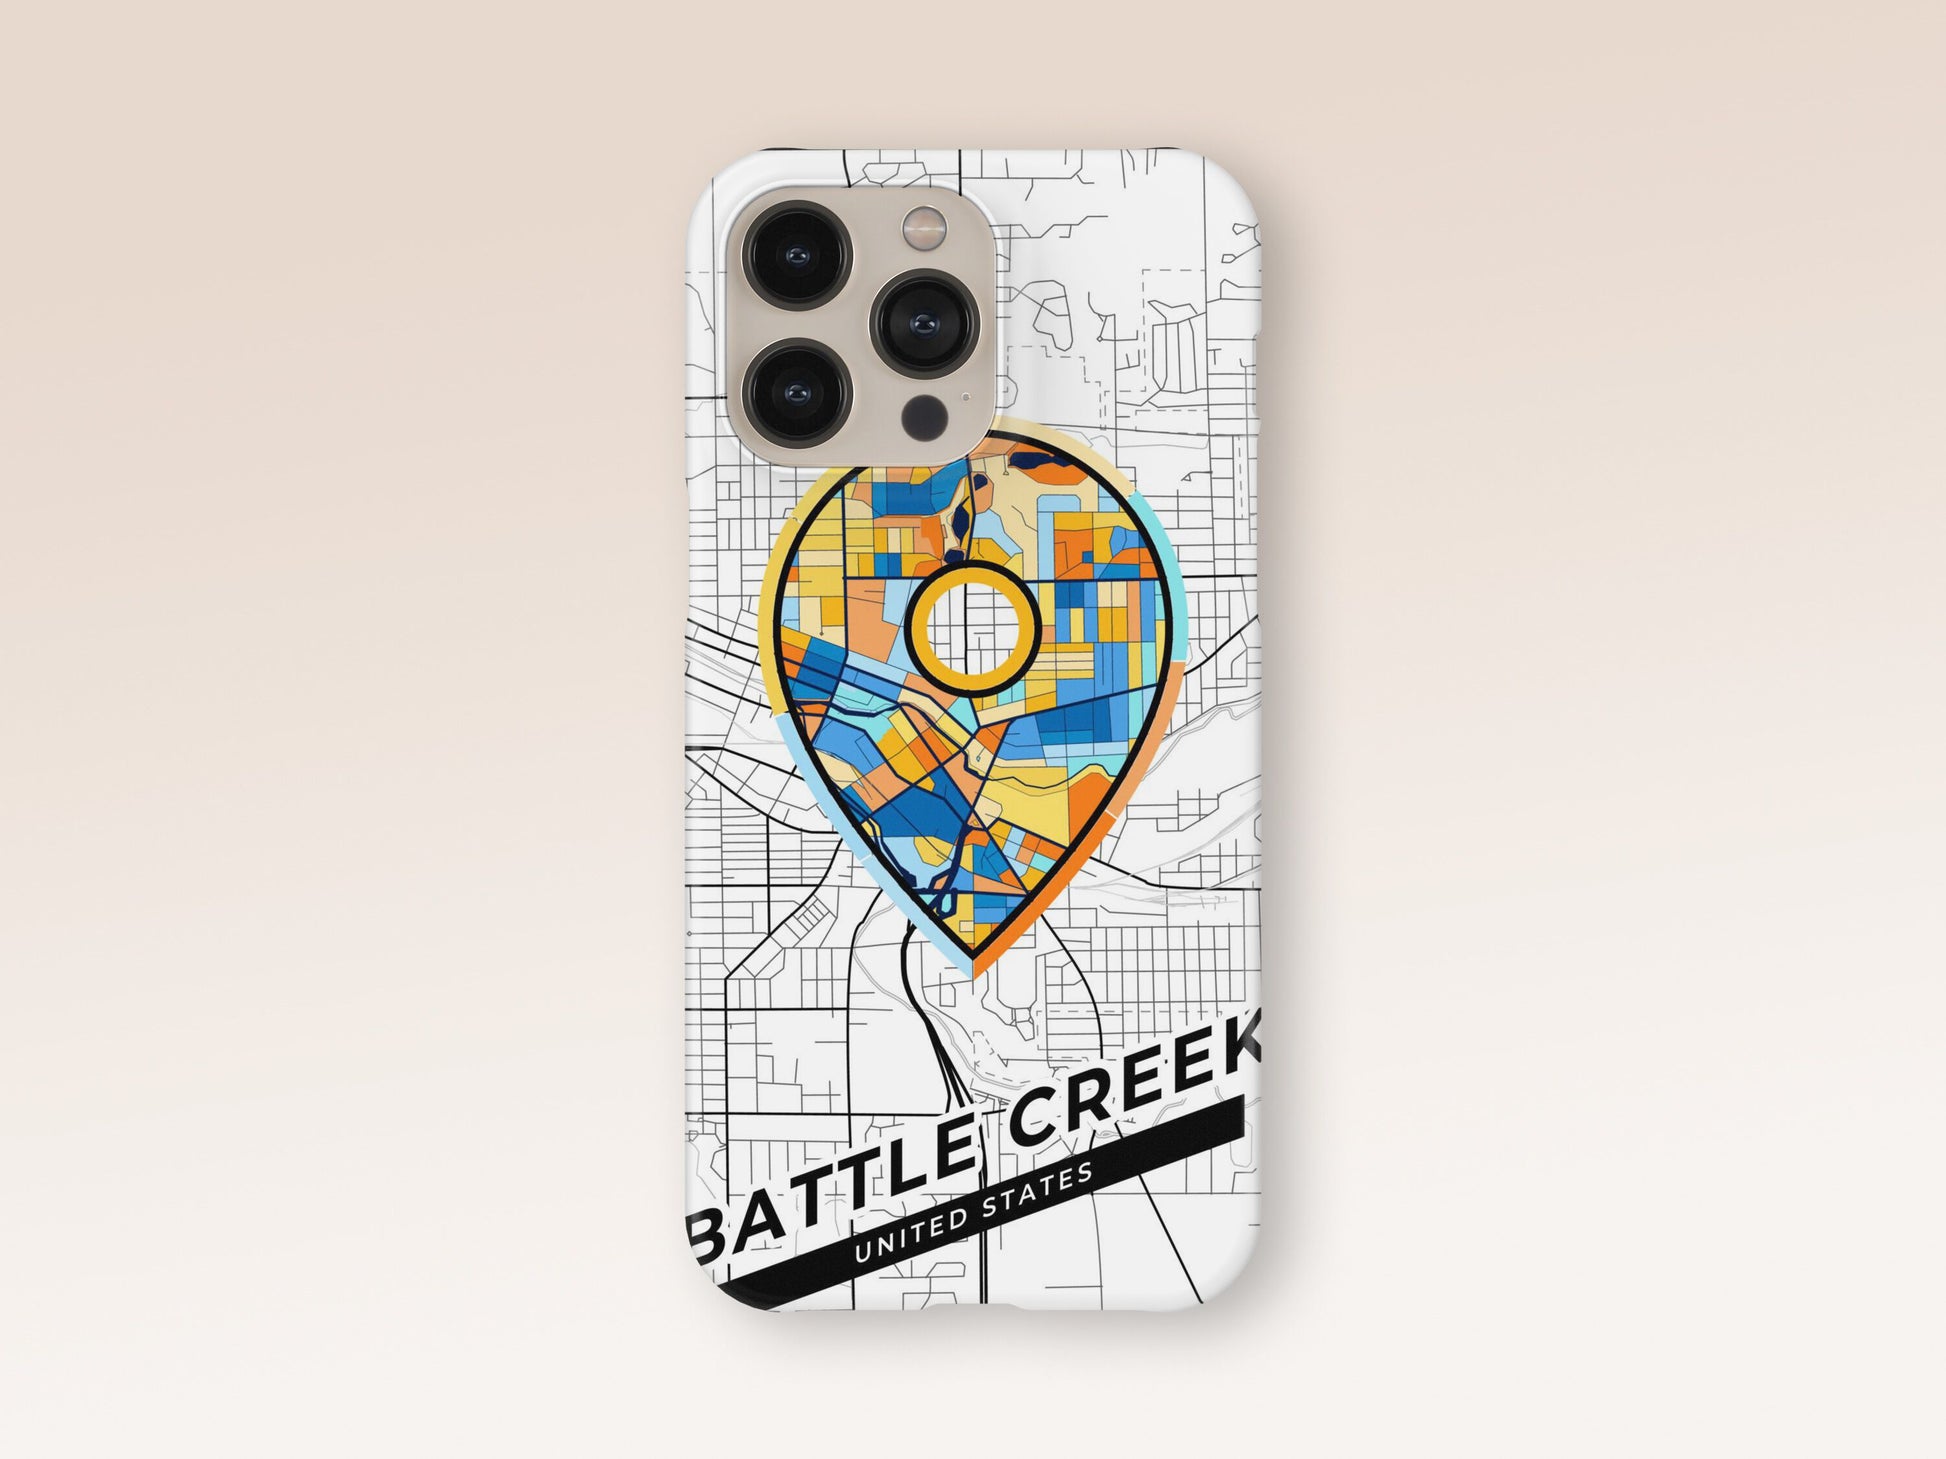 Battle Creek Michigan slim phone case with colorful icon. Birthday, wedding or housewarming gift. Couple match cases. 1